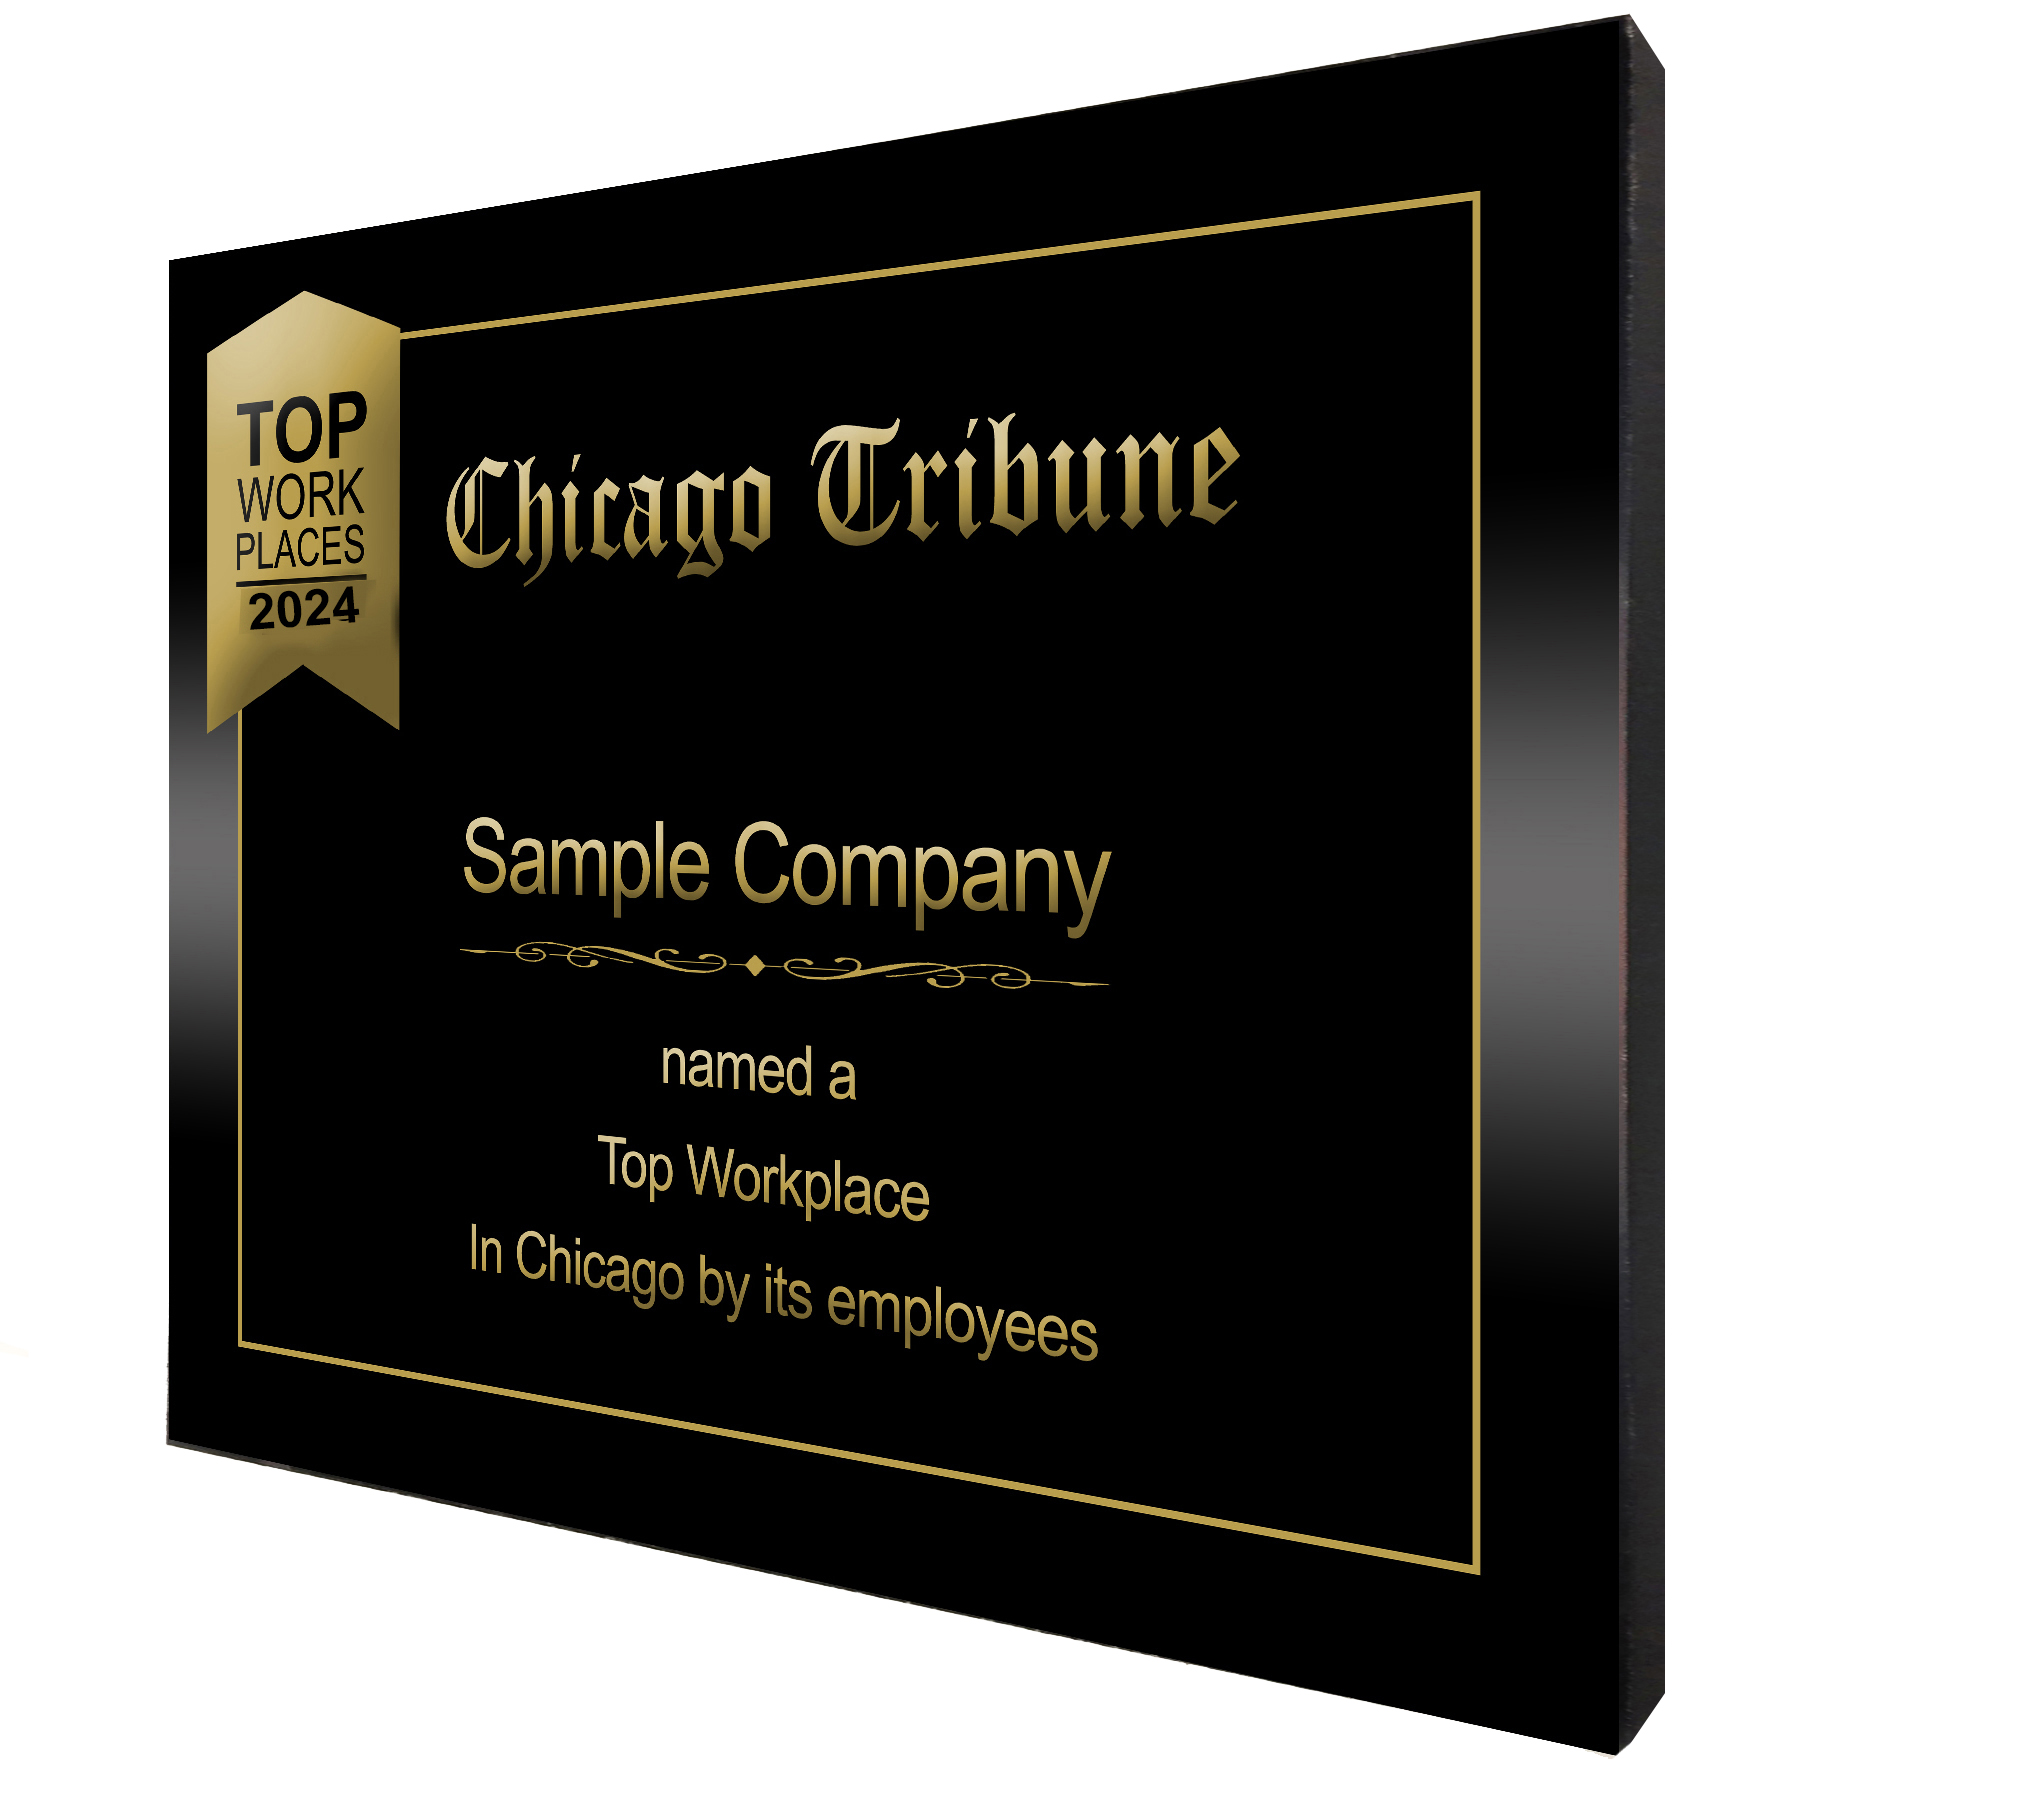 Small 7x9 Reverse Bevel Plaque (Gold) - $159.00